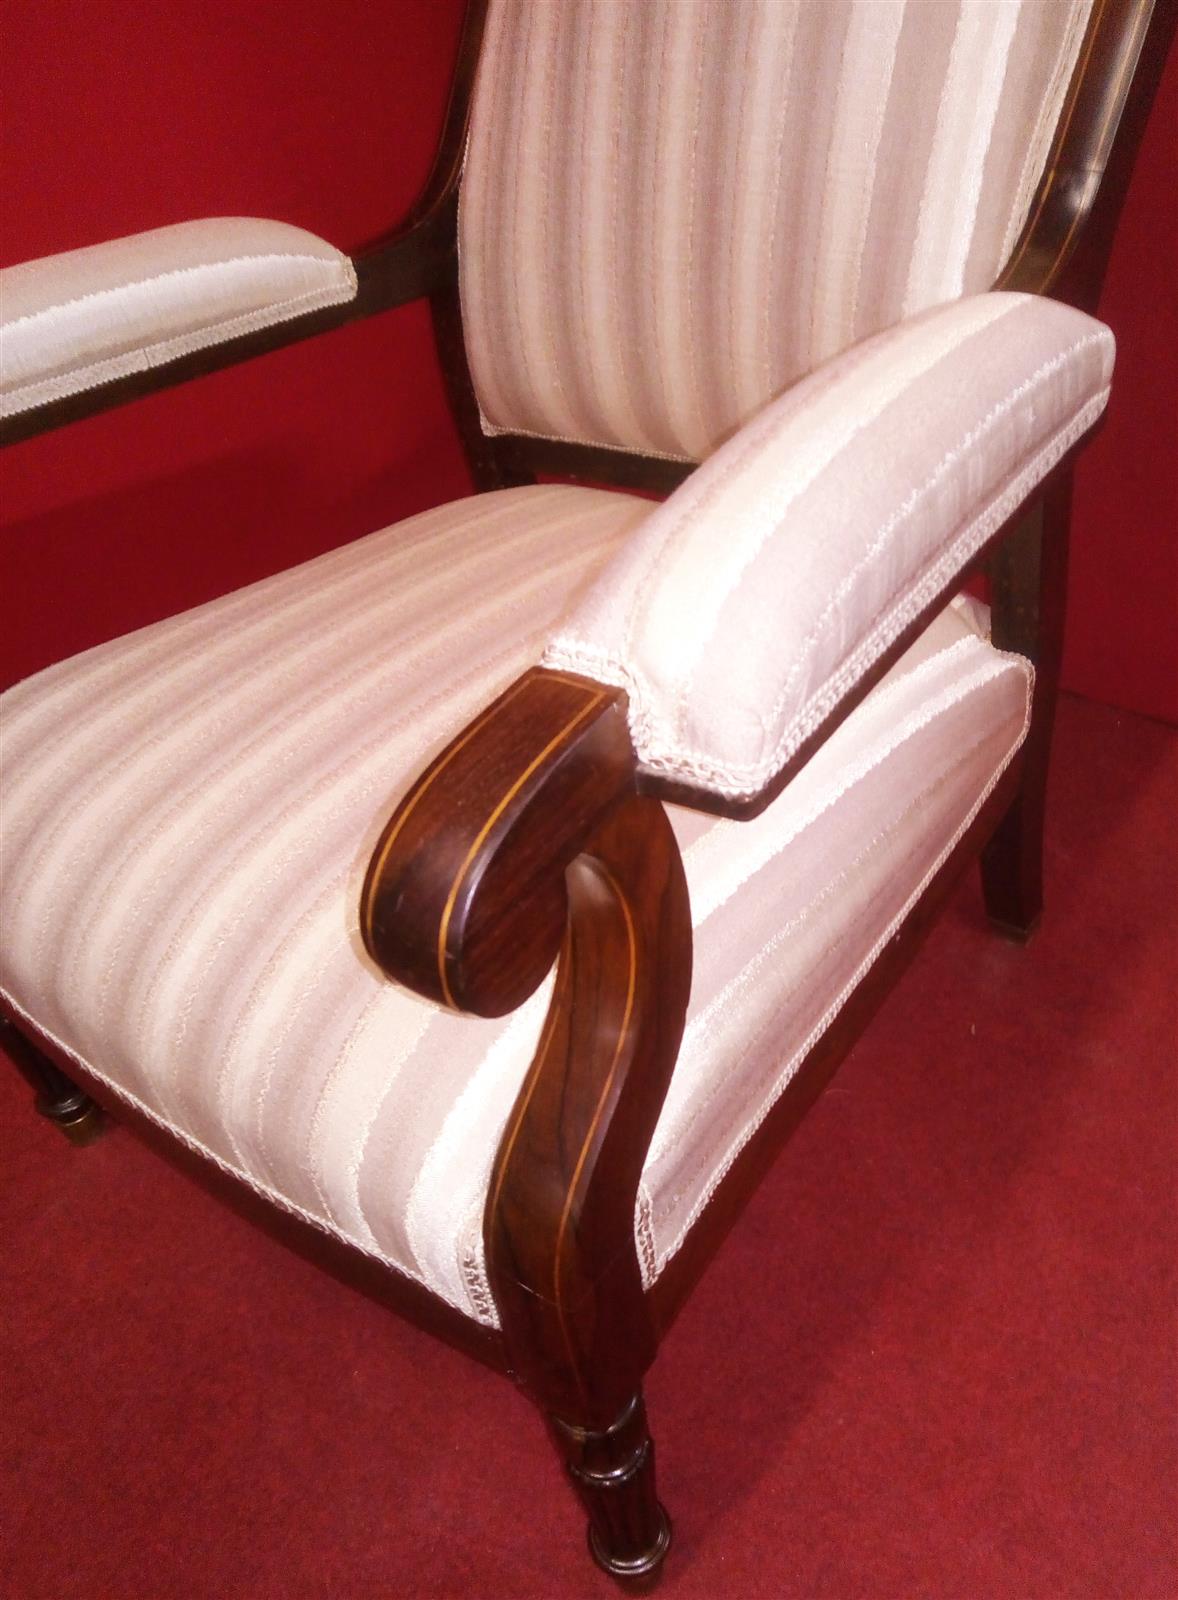 English armchair with striped fabric